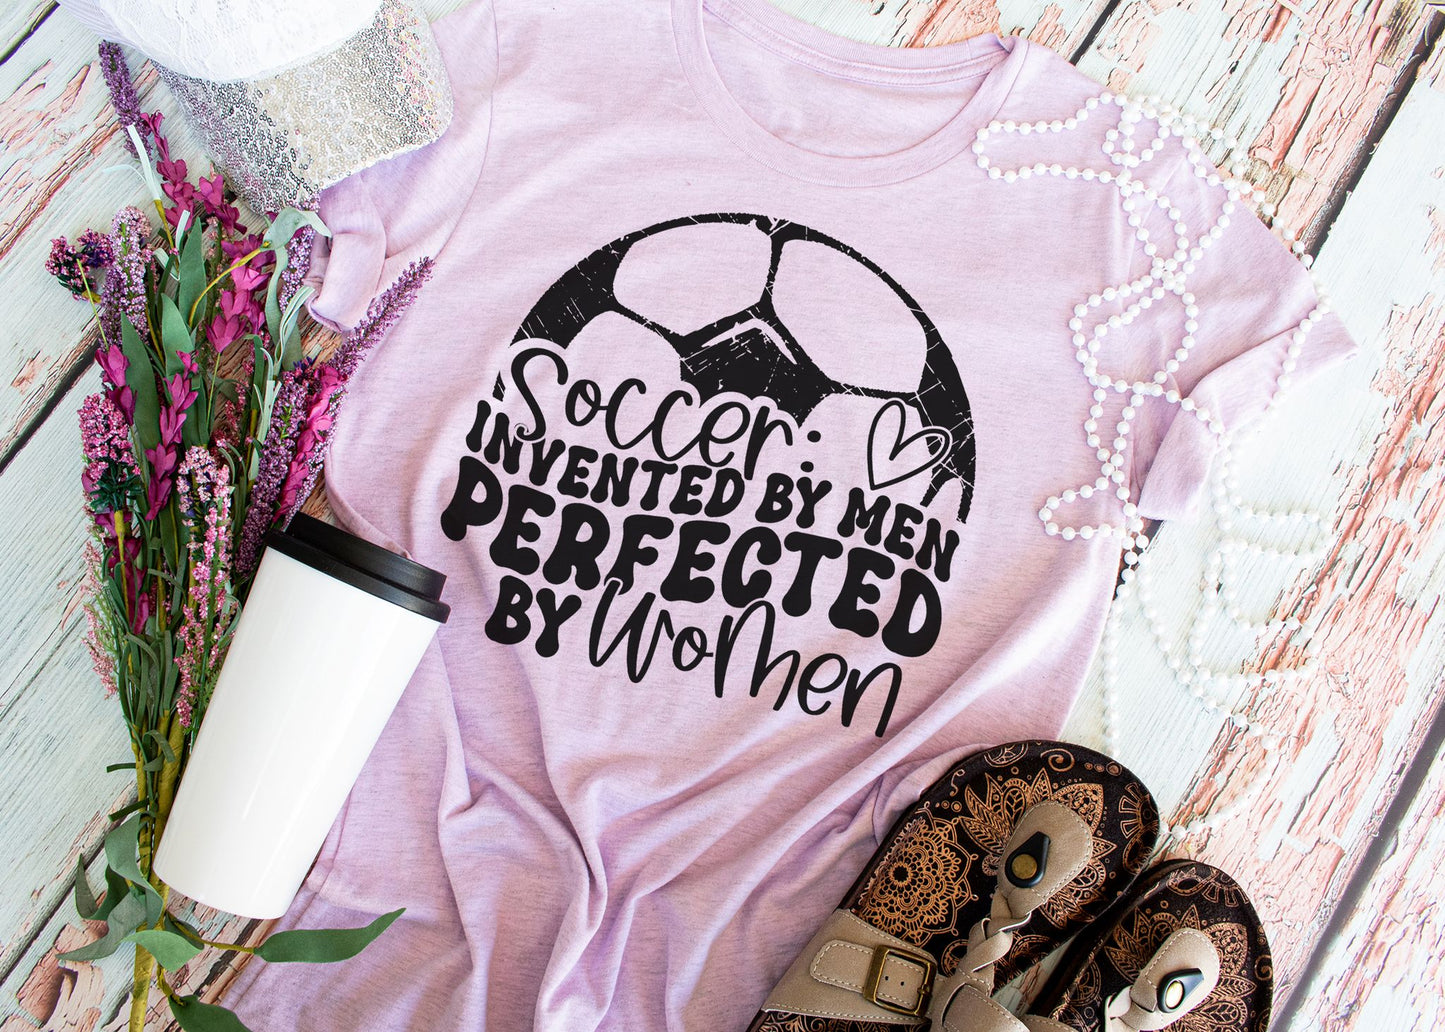 Soccer: Invented by Men, Perfected by Women